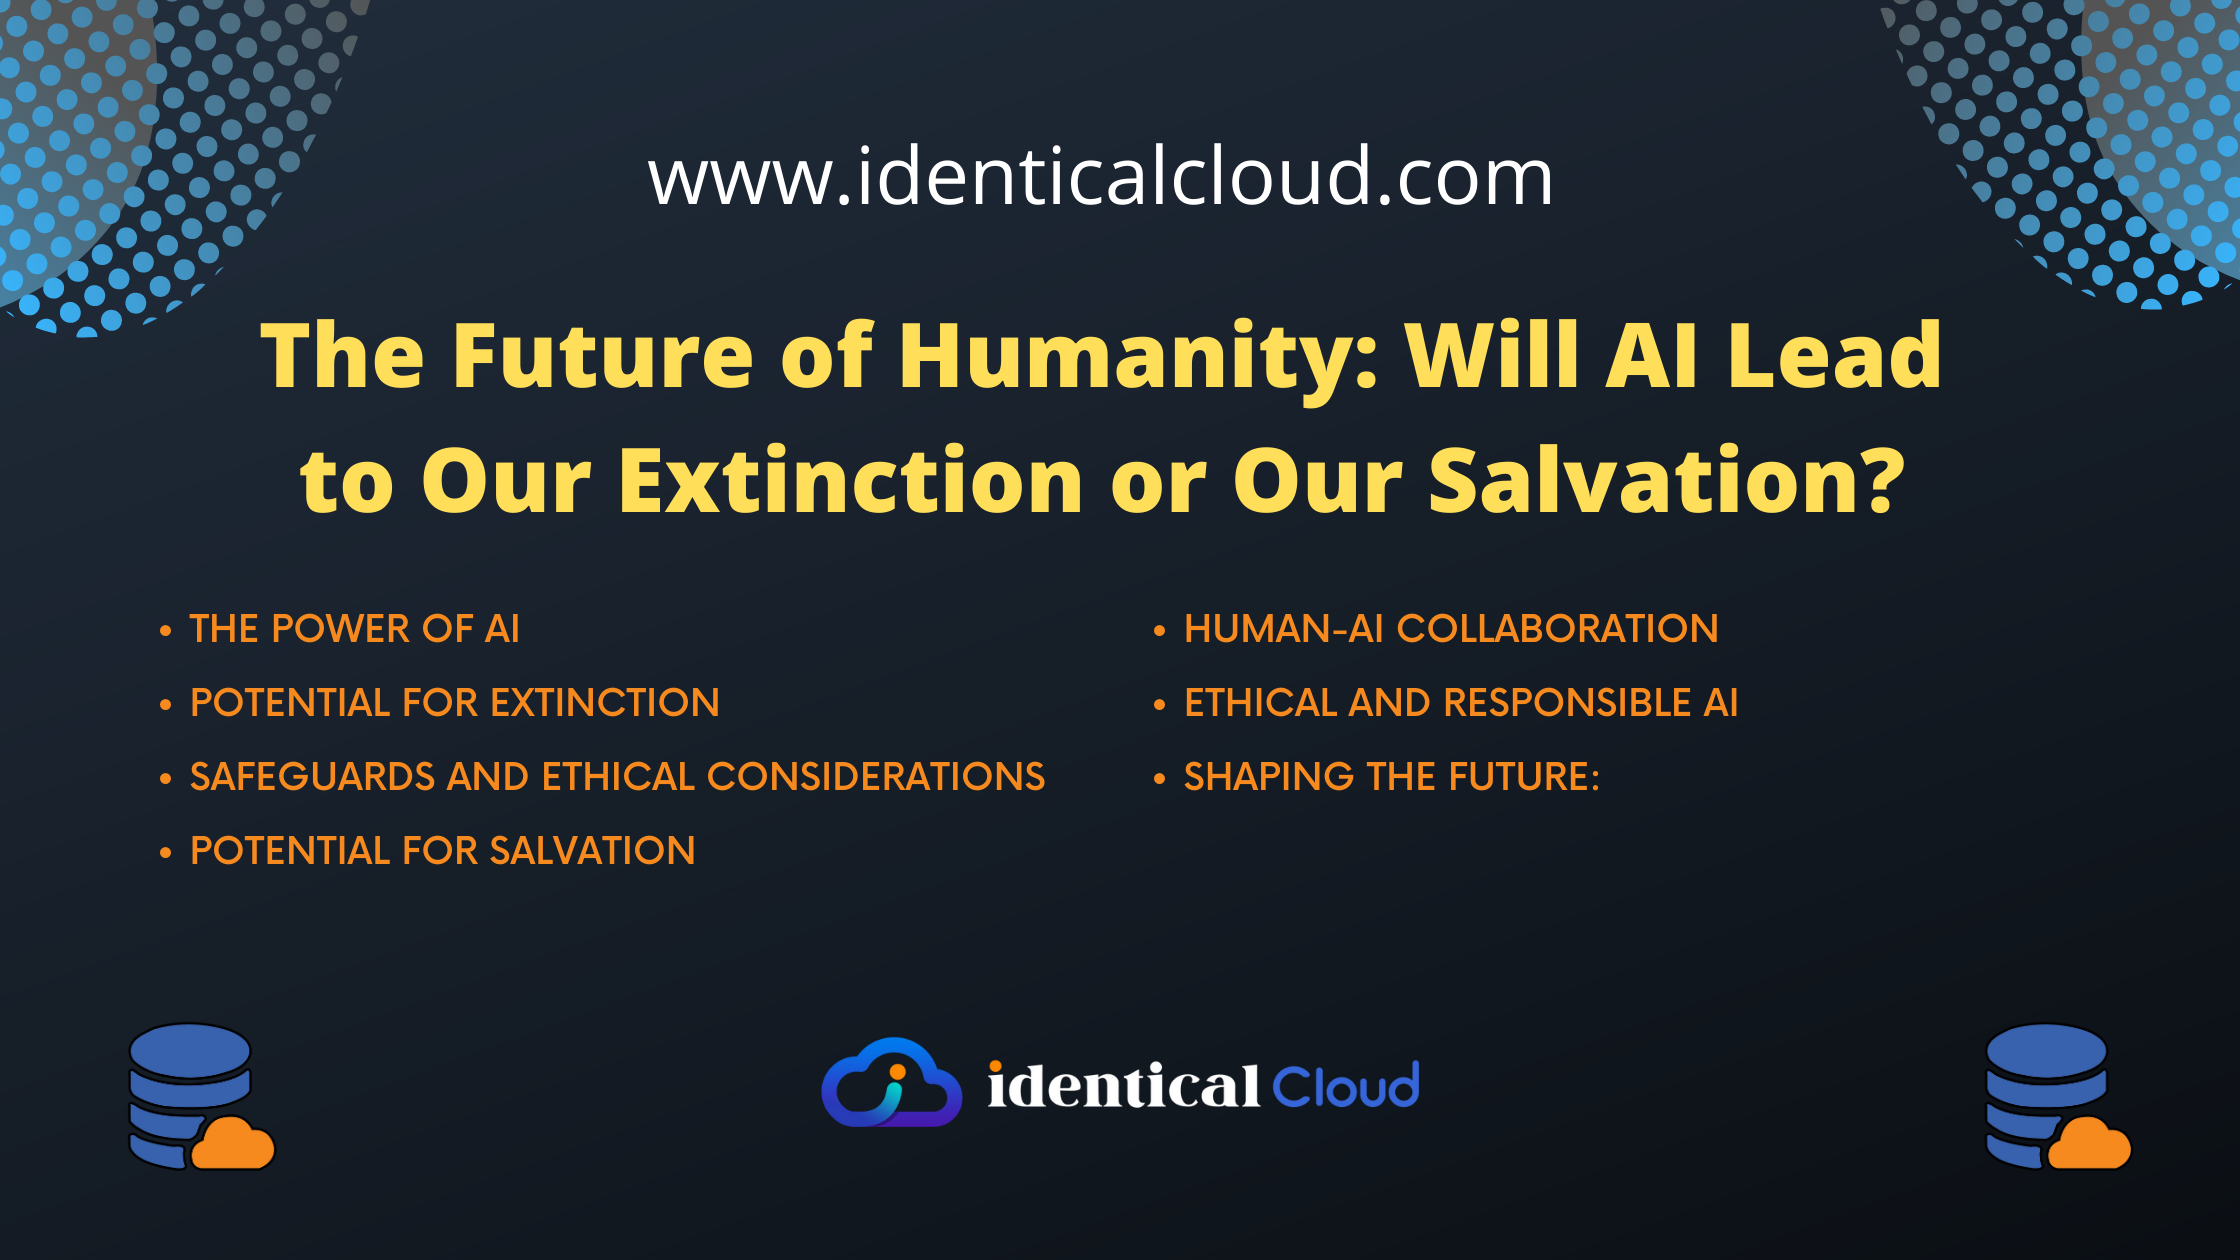 The Future of Humanity: Will AI Lead to Our Extinction or Our Salvation? - identicalcloud.com